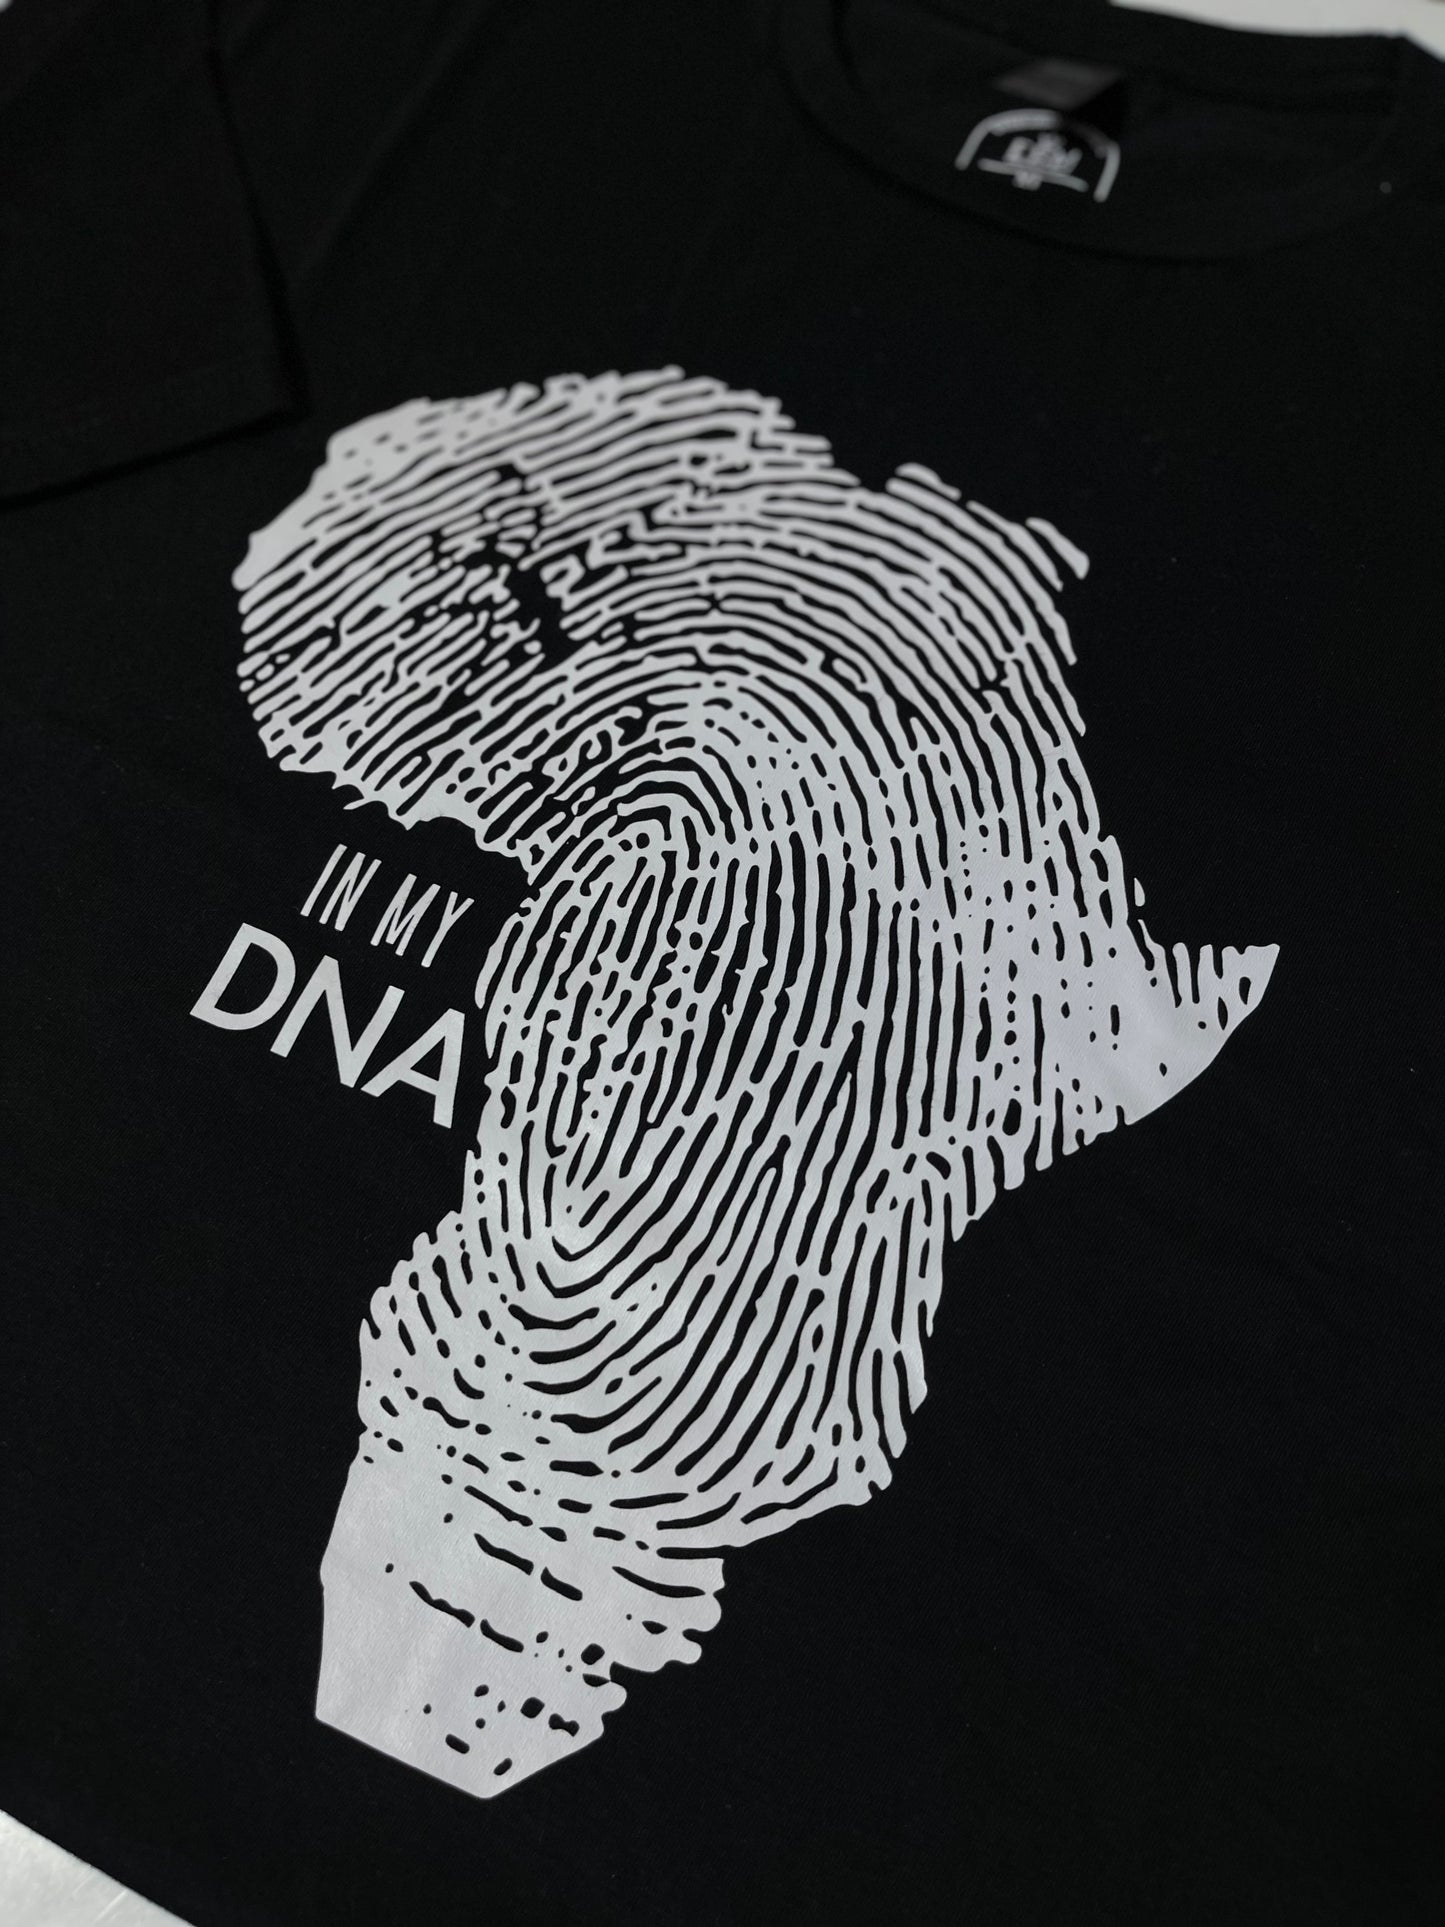 In my DNA T-Shirt